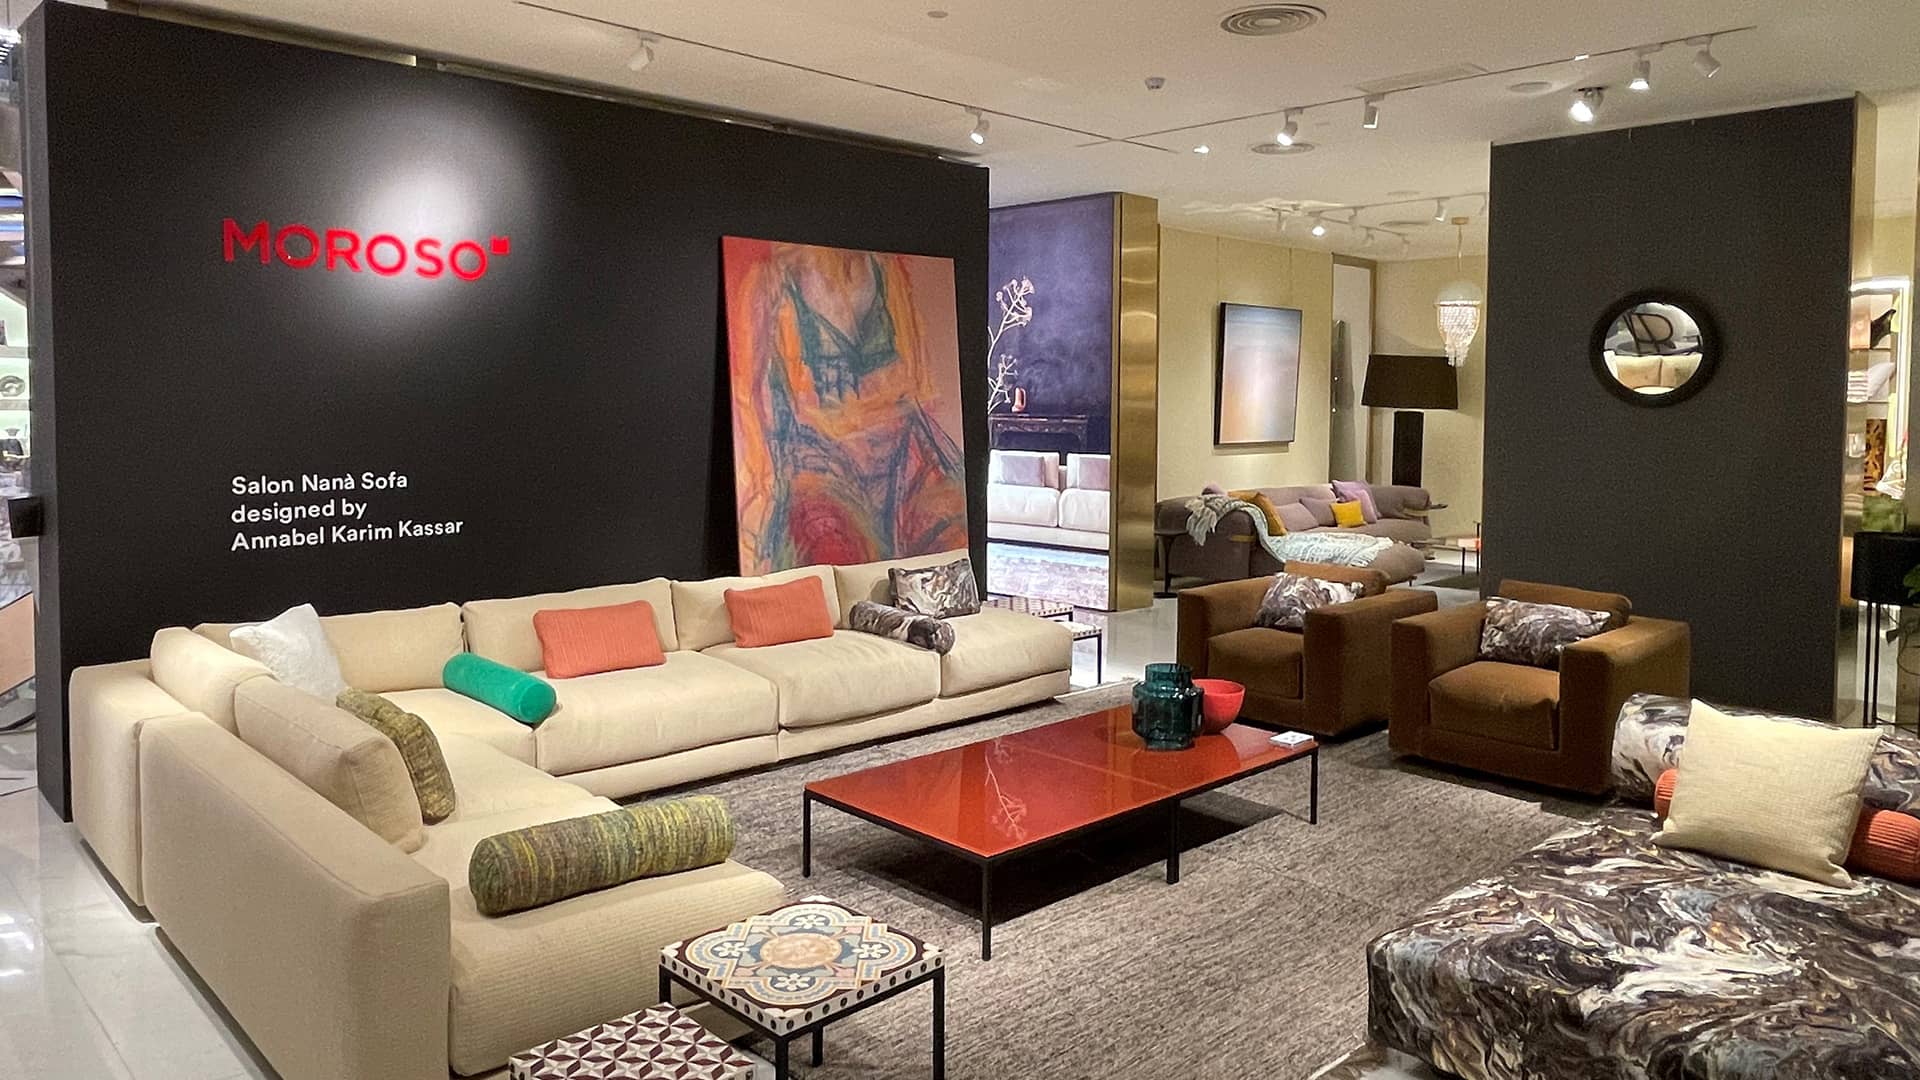 Moroso launches 2021 collection in Beijing